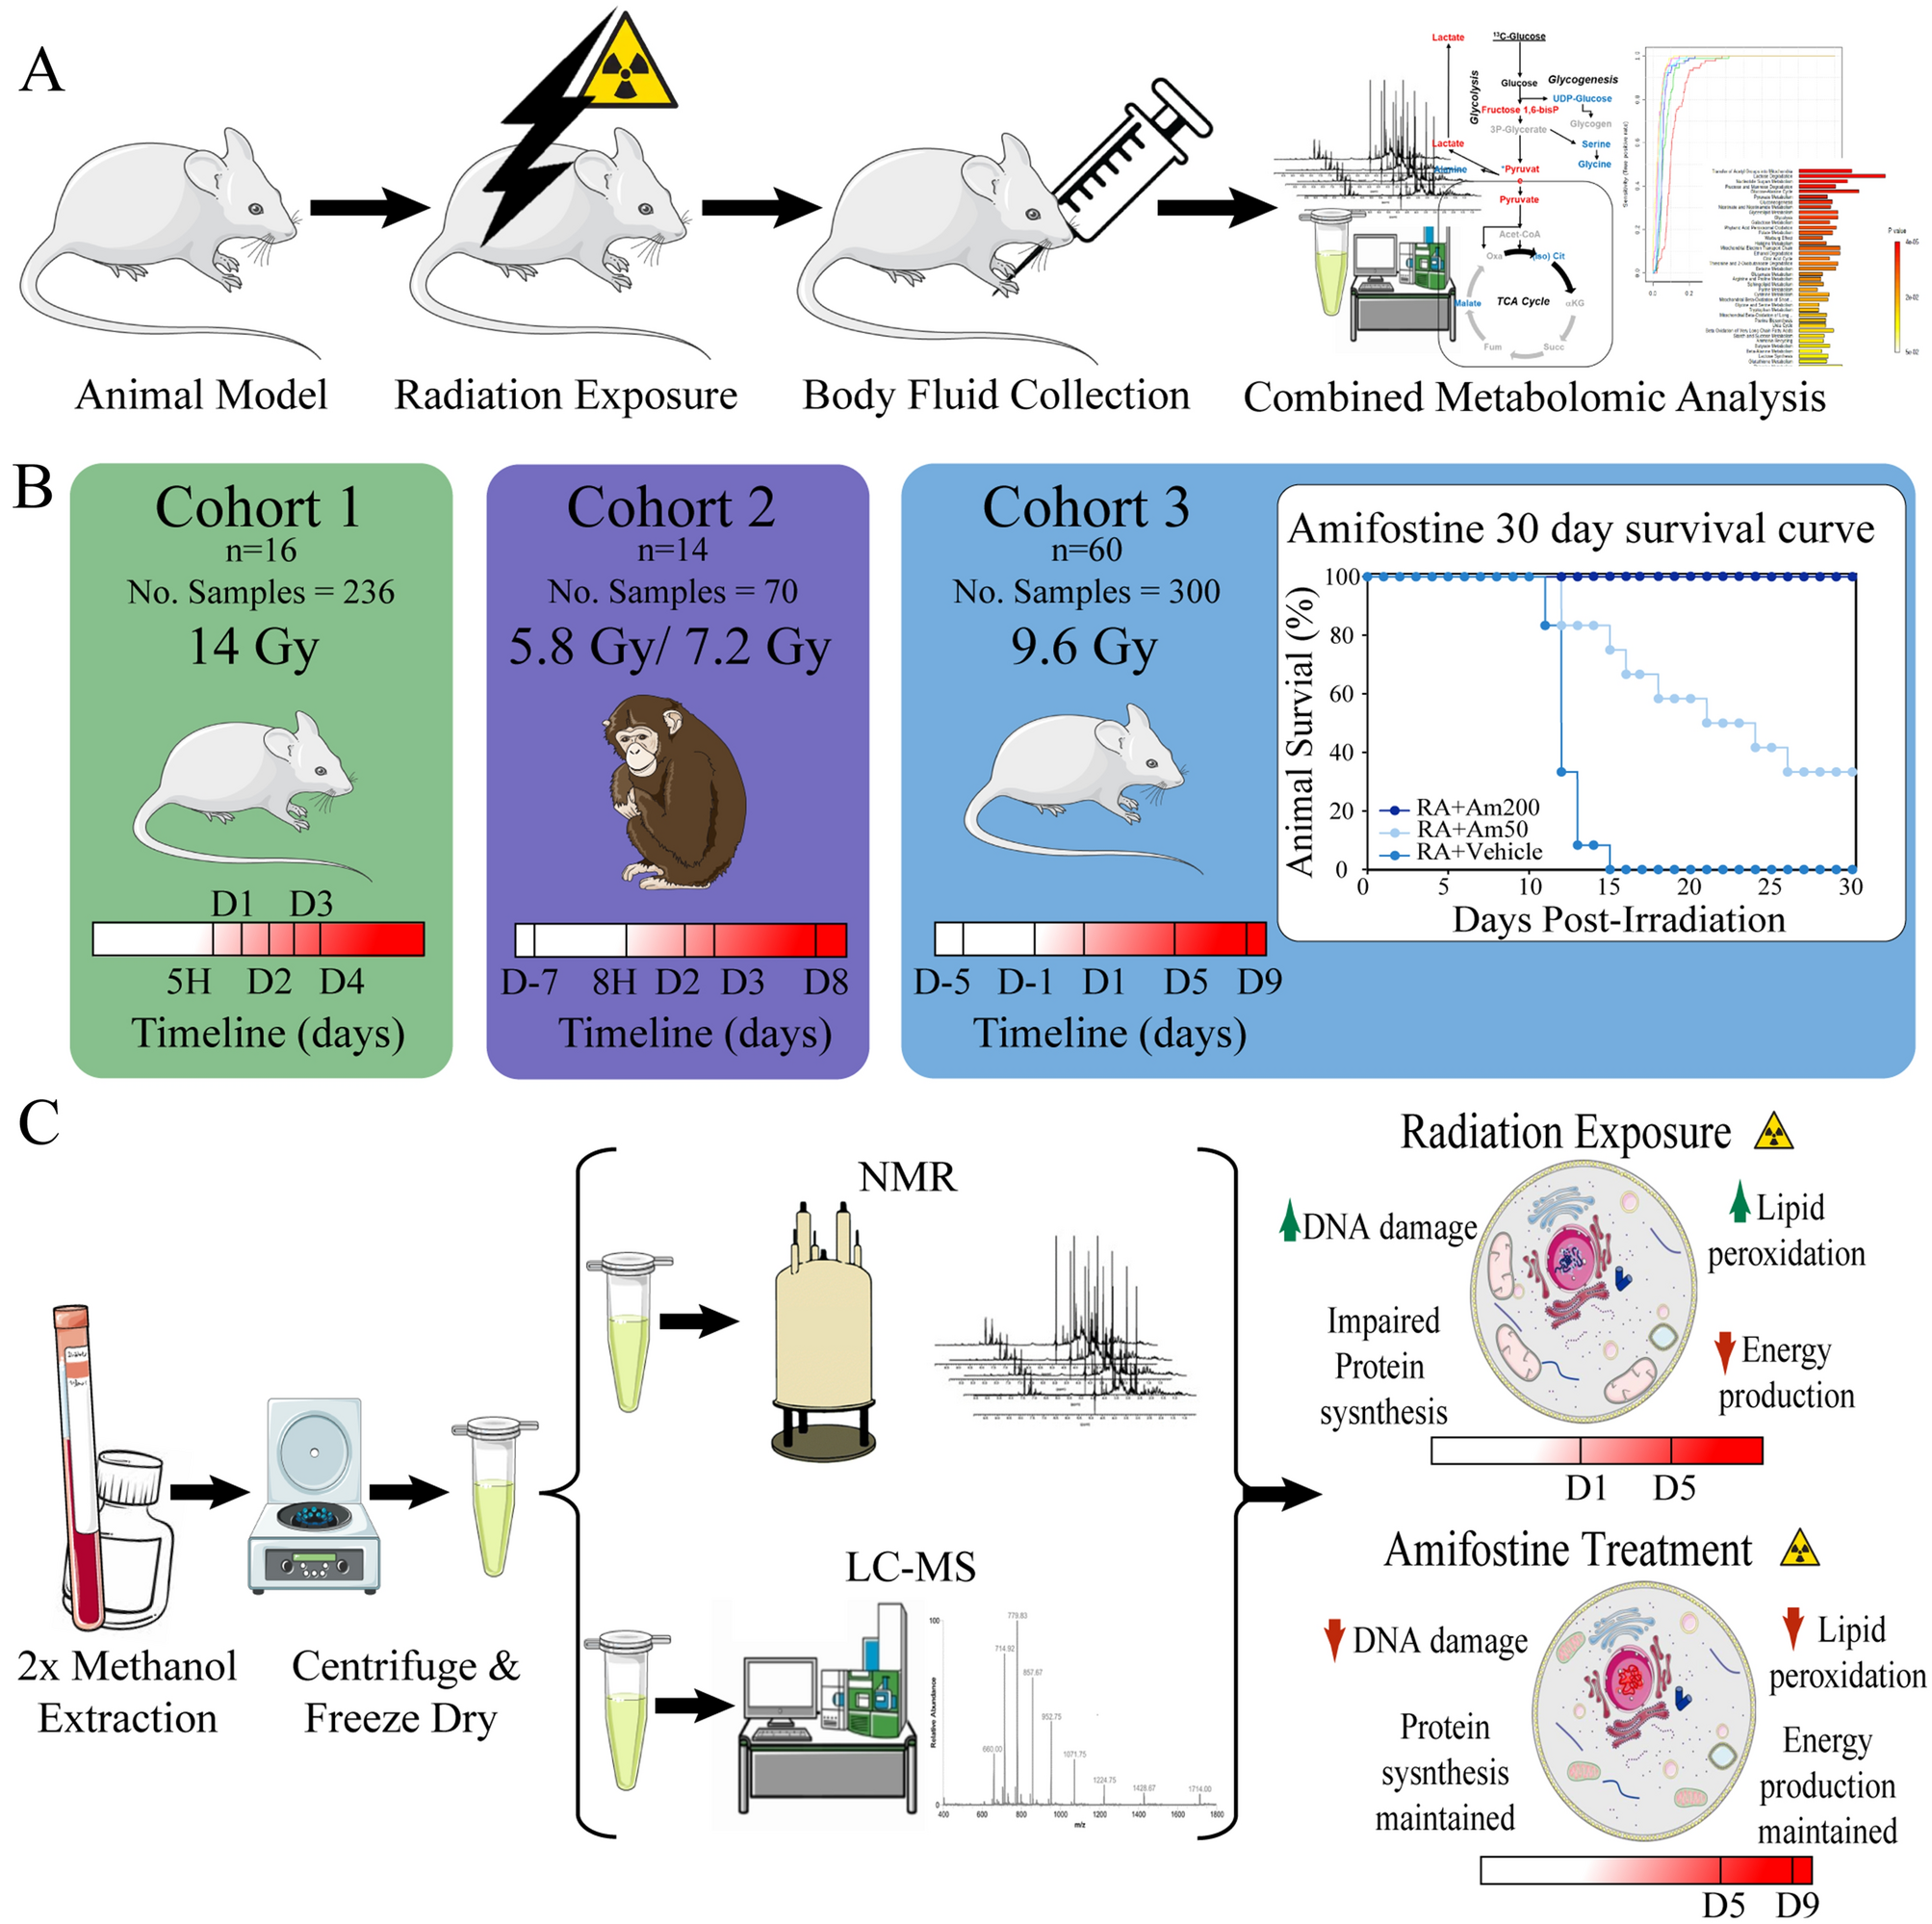 Radiation exposure induces cross-species temporal metabolic changes that  are mitigated in mice by amifostine | Scientific Reports